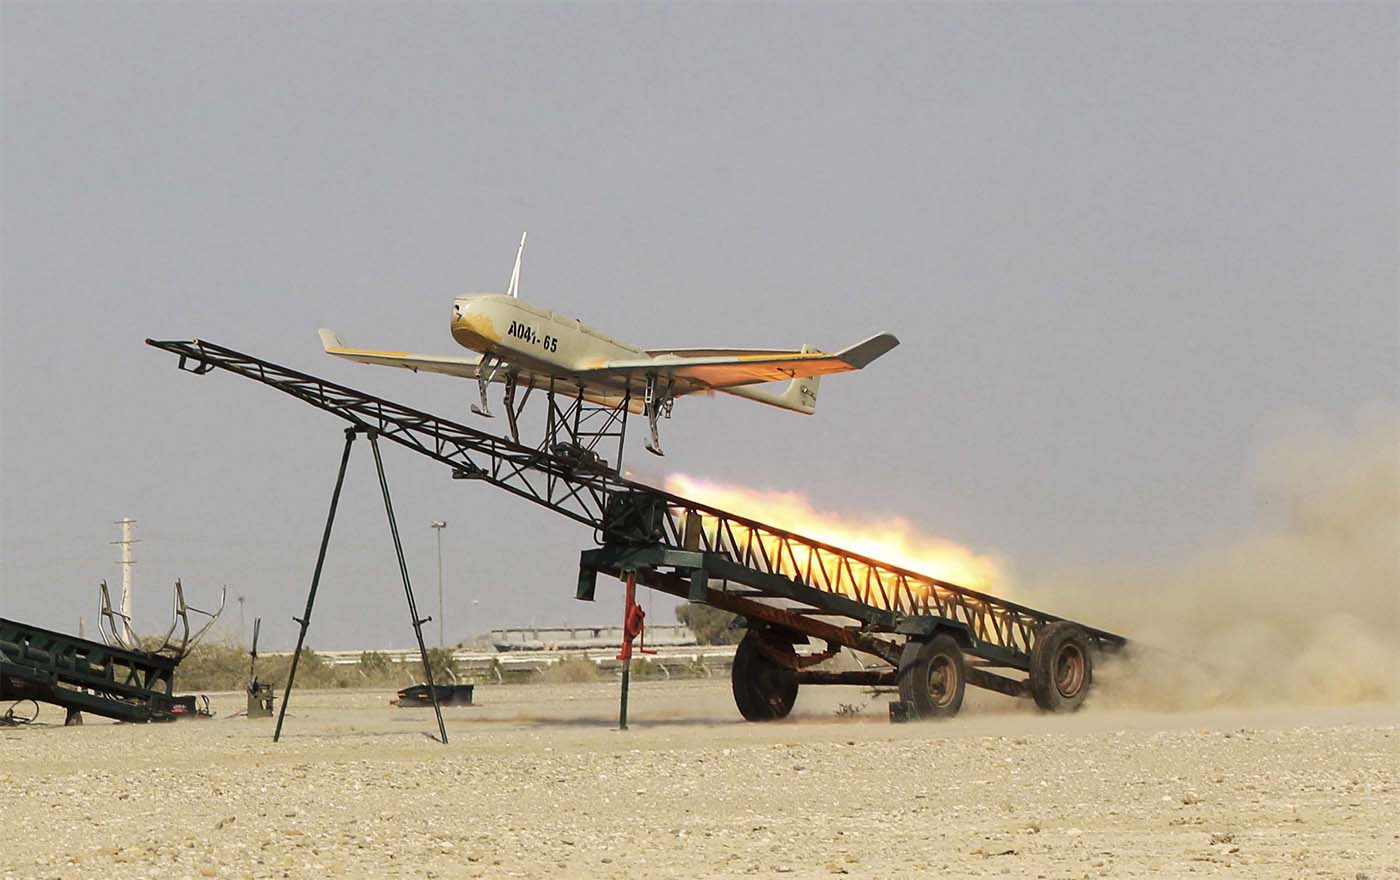 Iranian made drone is launched during a military drill in Jask port, southern Iran in 2014